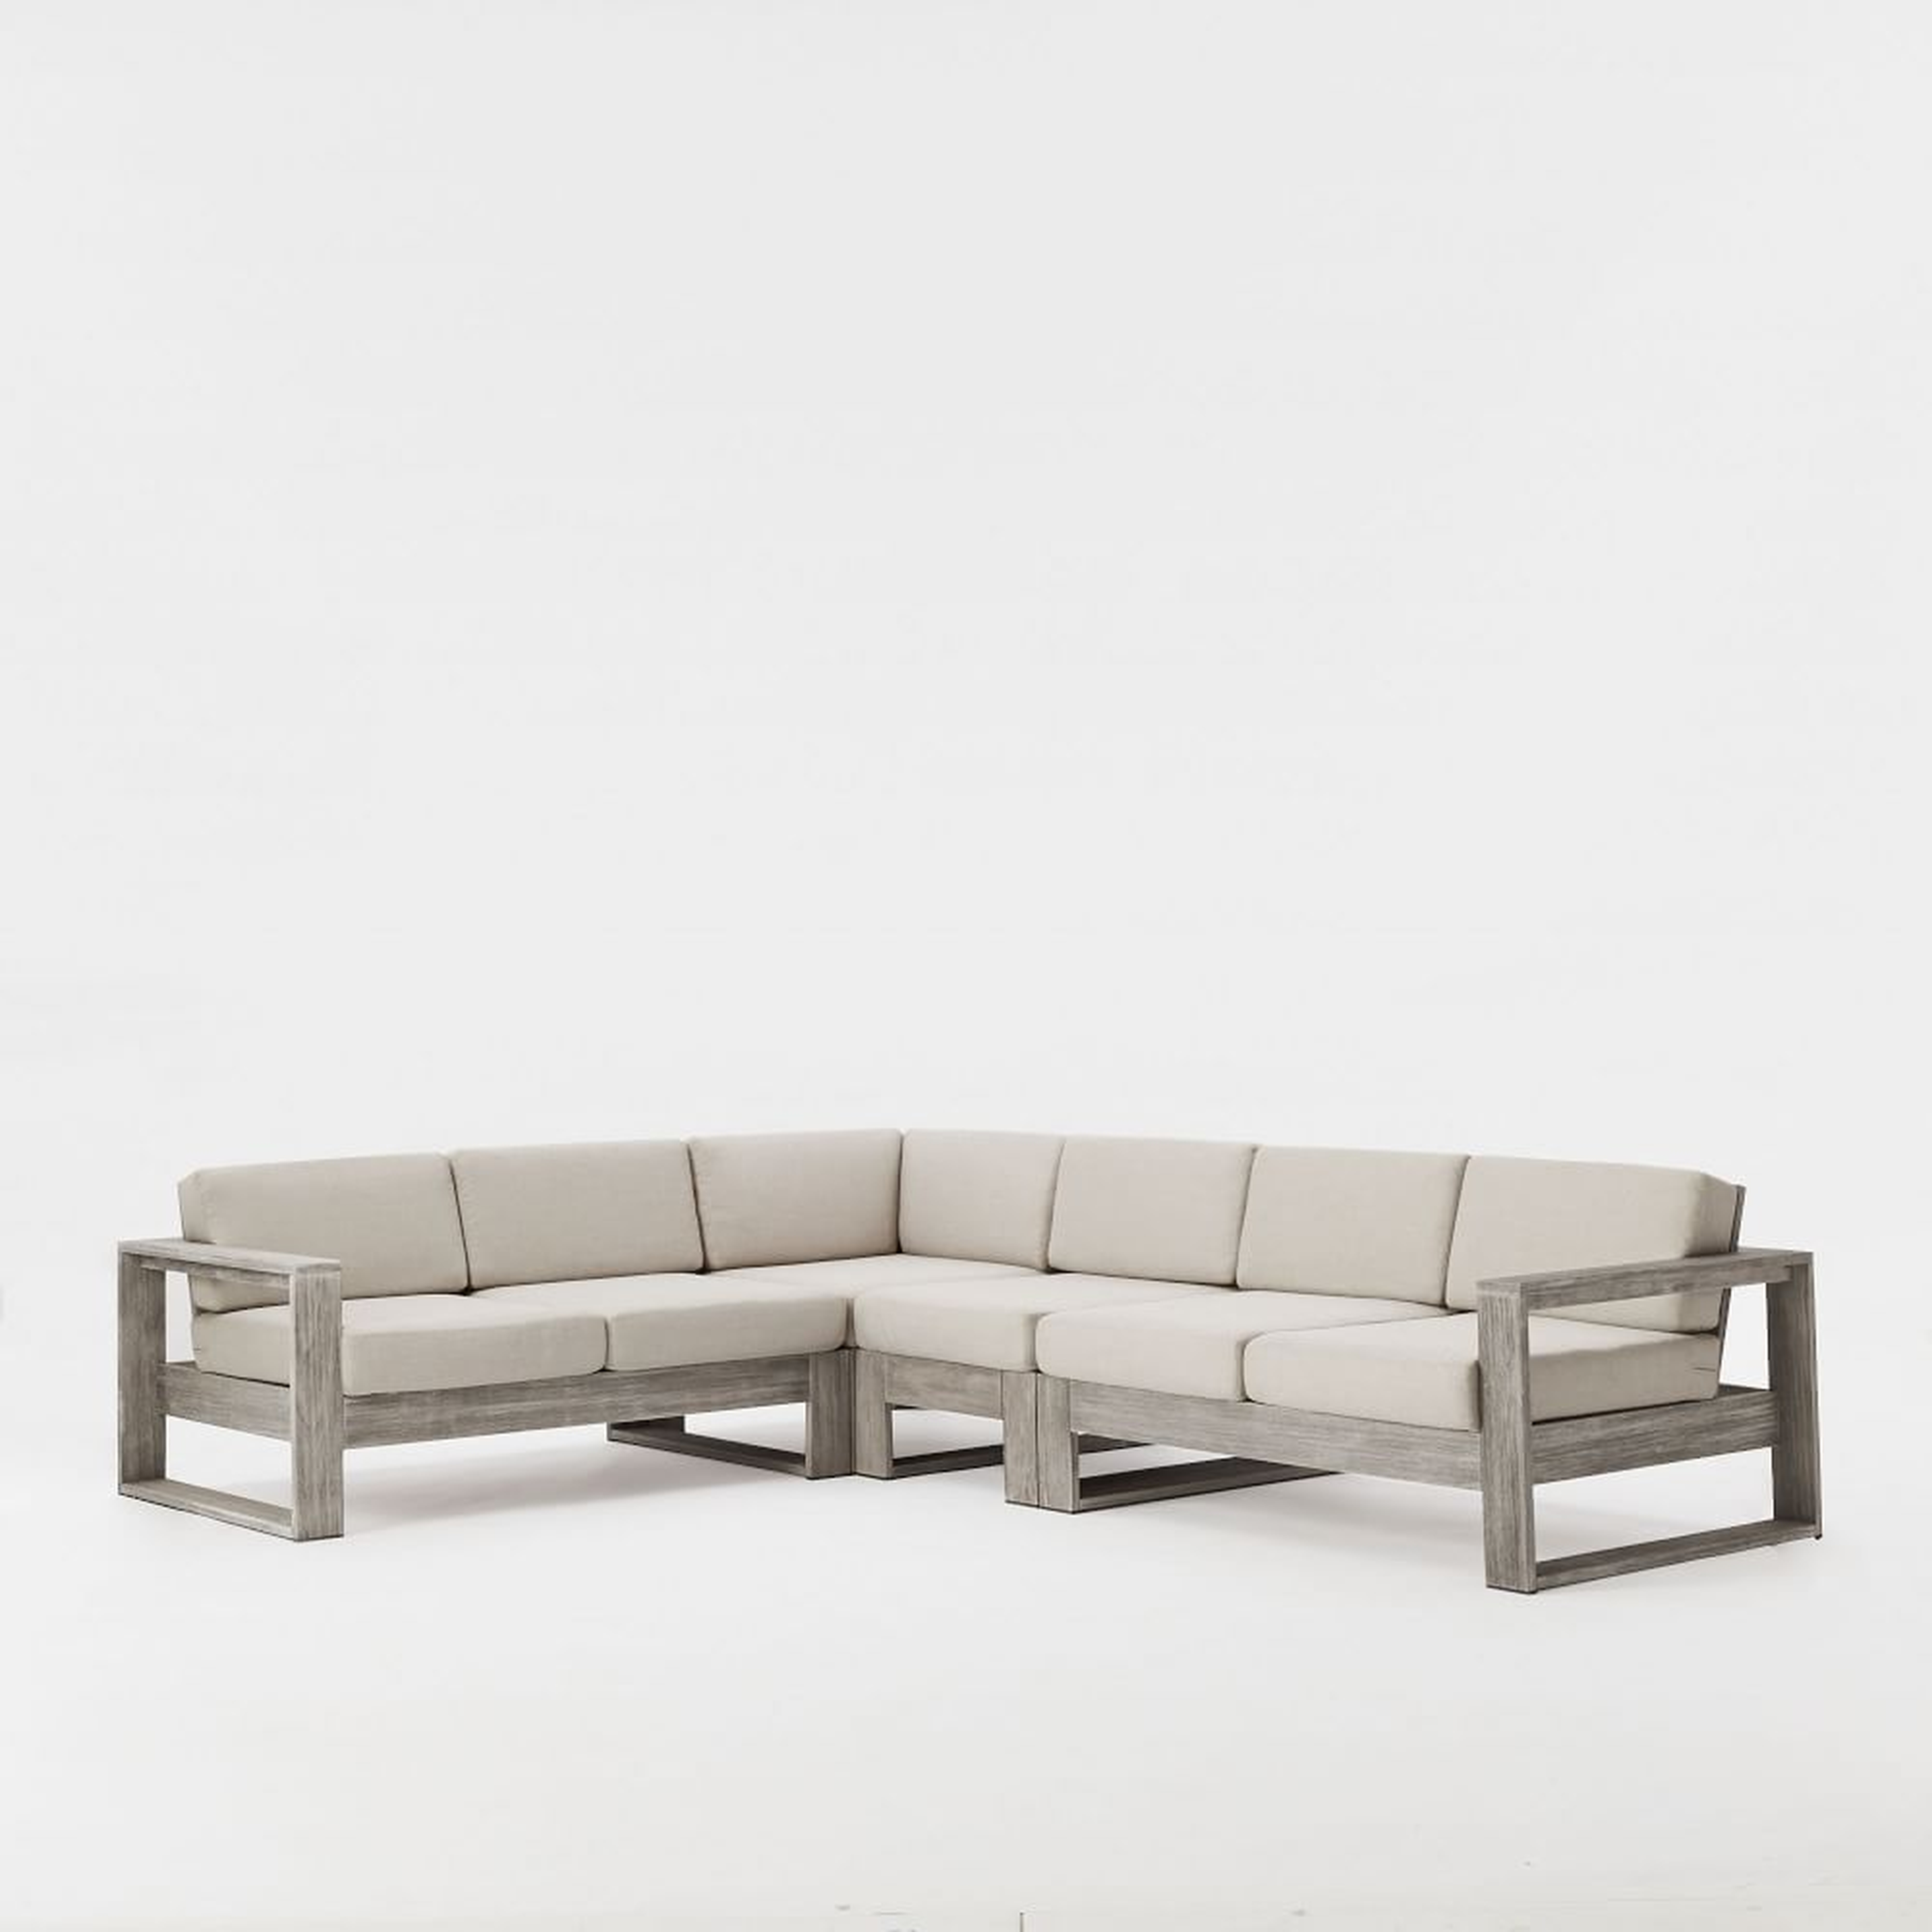 Portside Set 6: Weathered Gray L-Shaped 4 Piece Sectional - West Elm